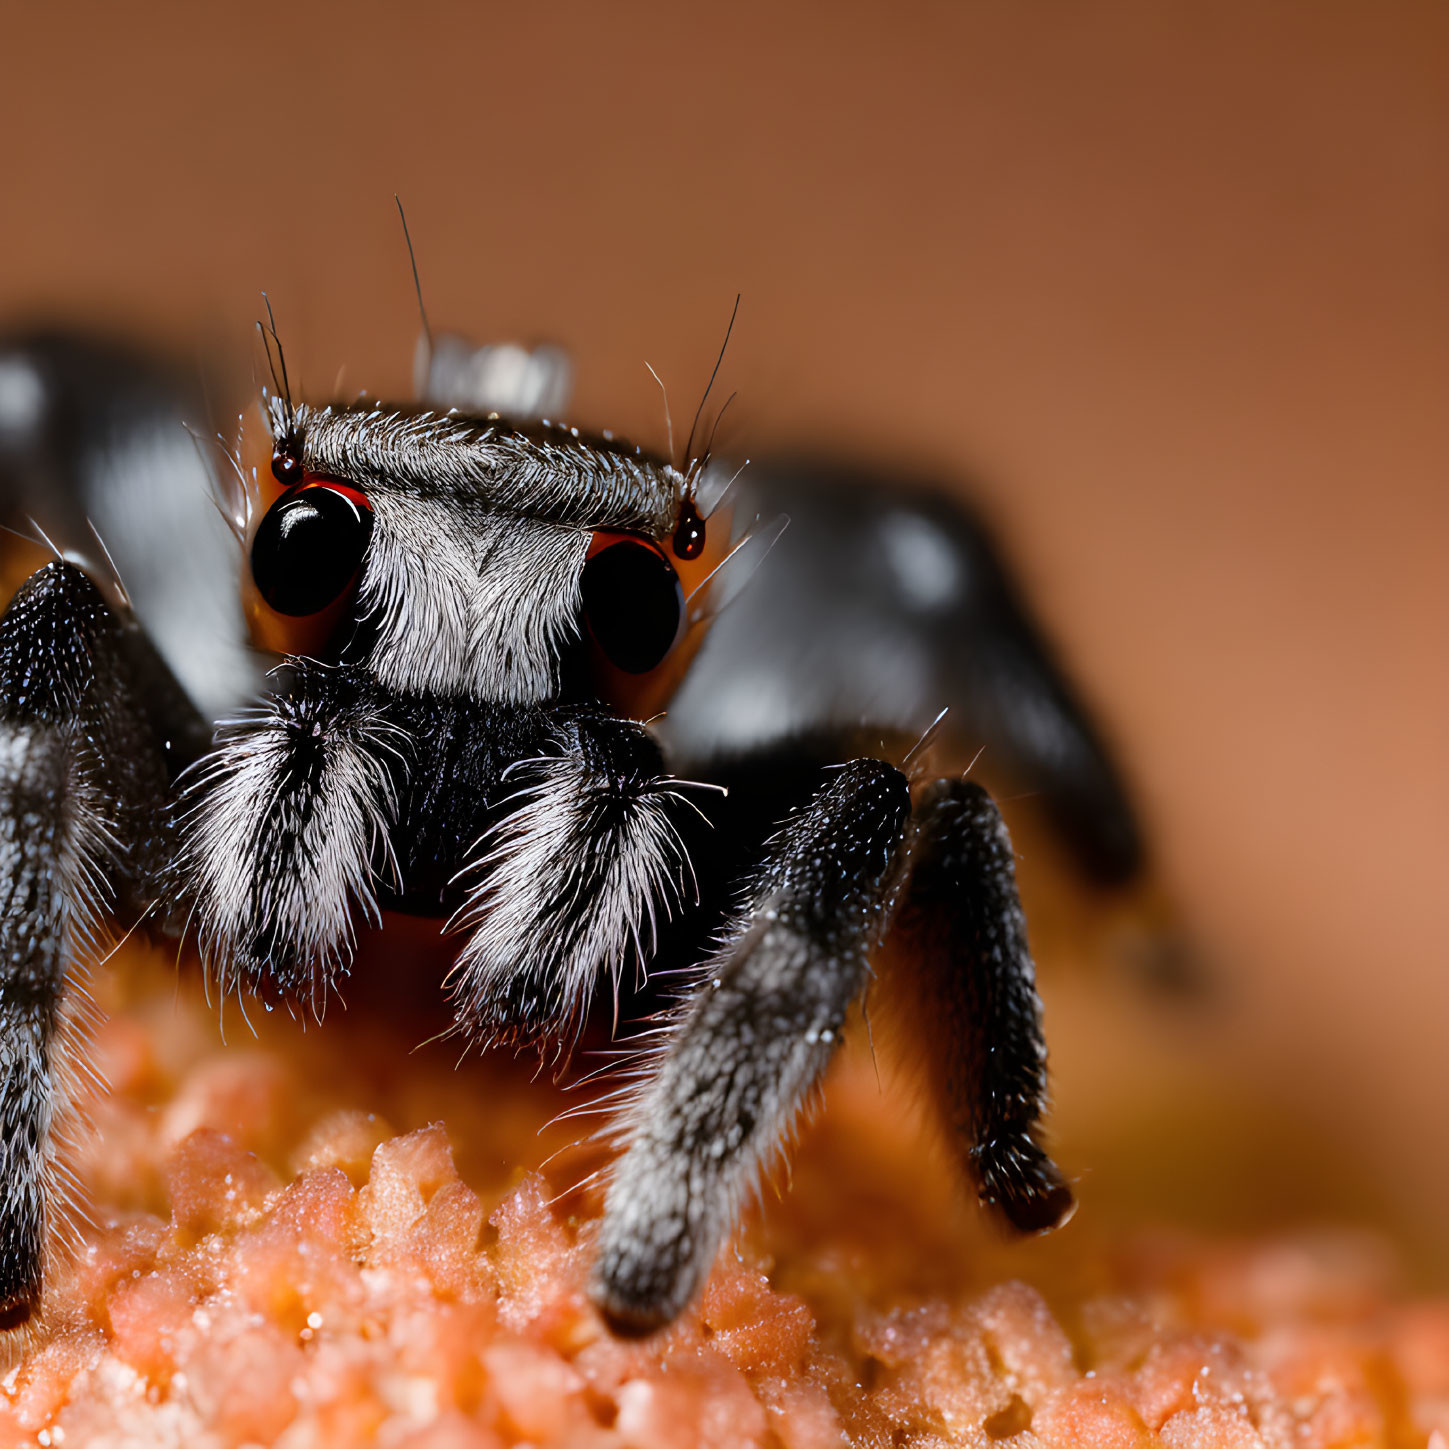 Detailed Close-Up of Jumping Spider with Vivid Eyes and Furry Texture